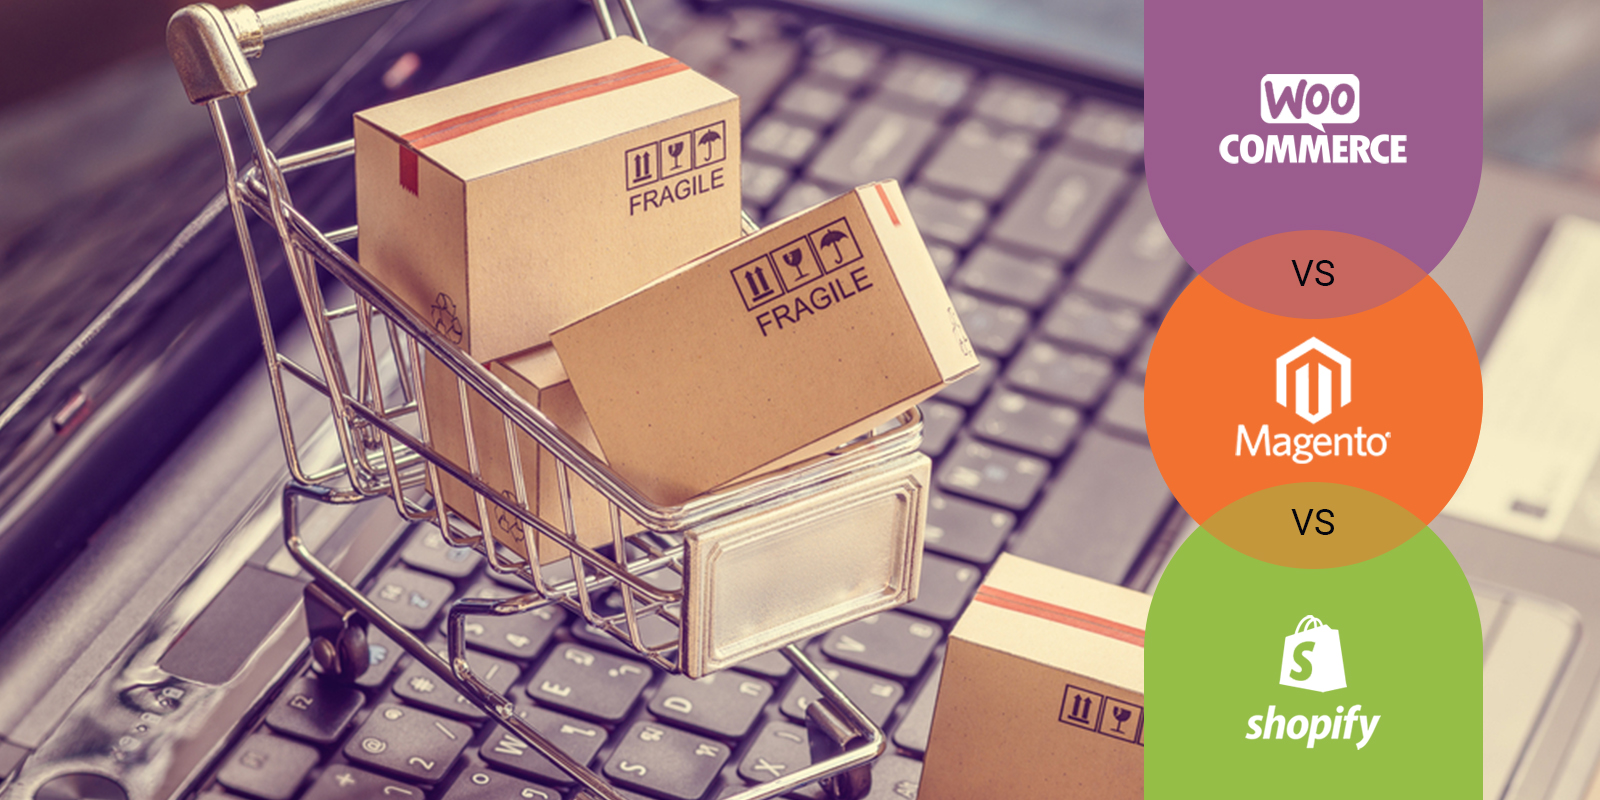 WooCommerce Vs Magento Vs Shopify – Which One Is the Best?